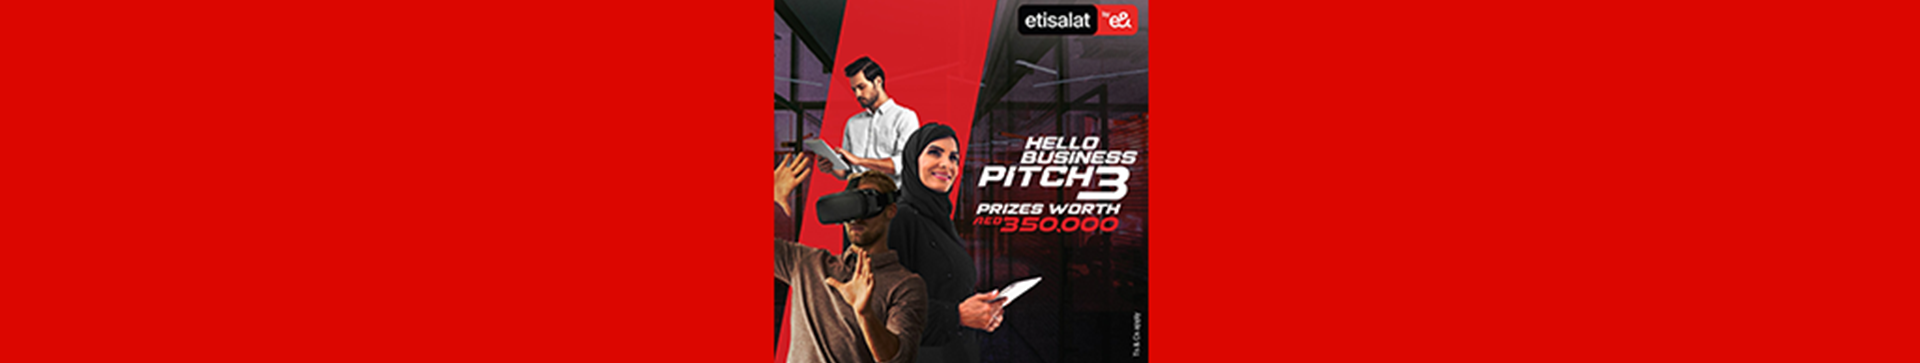 etisalat-by-eand-launches-hello-business-pitch-1920x363